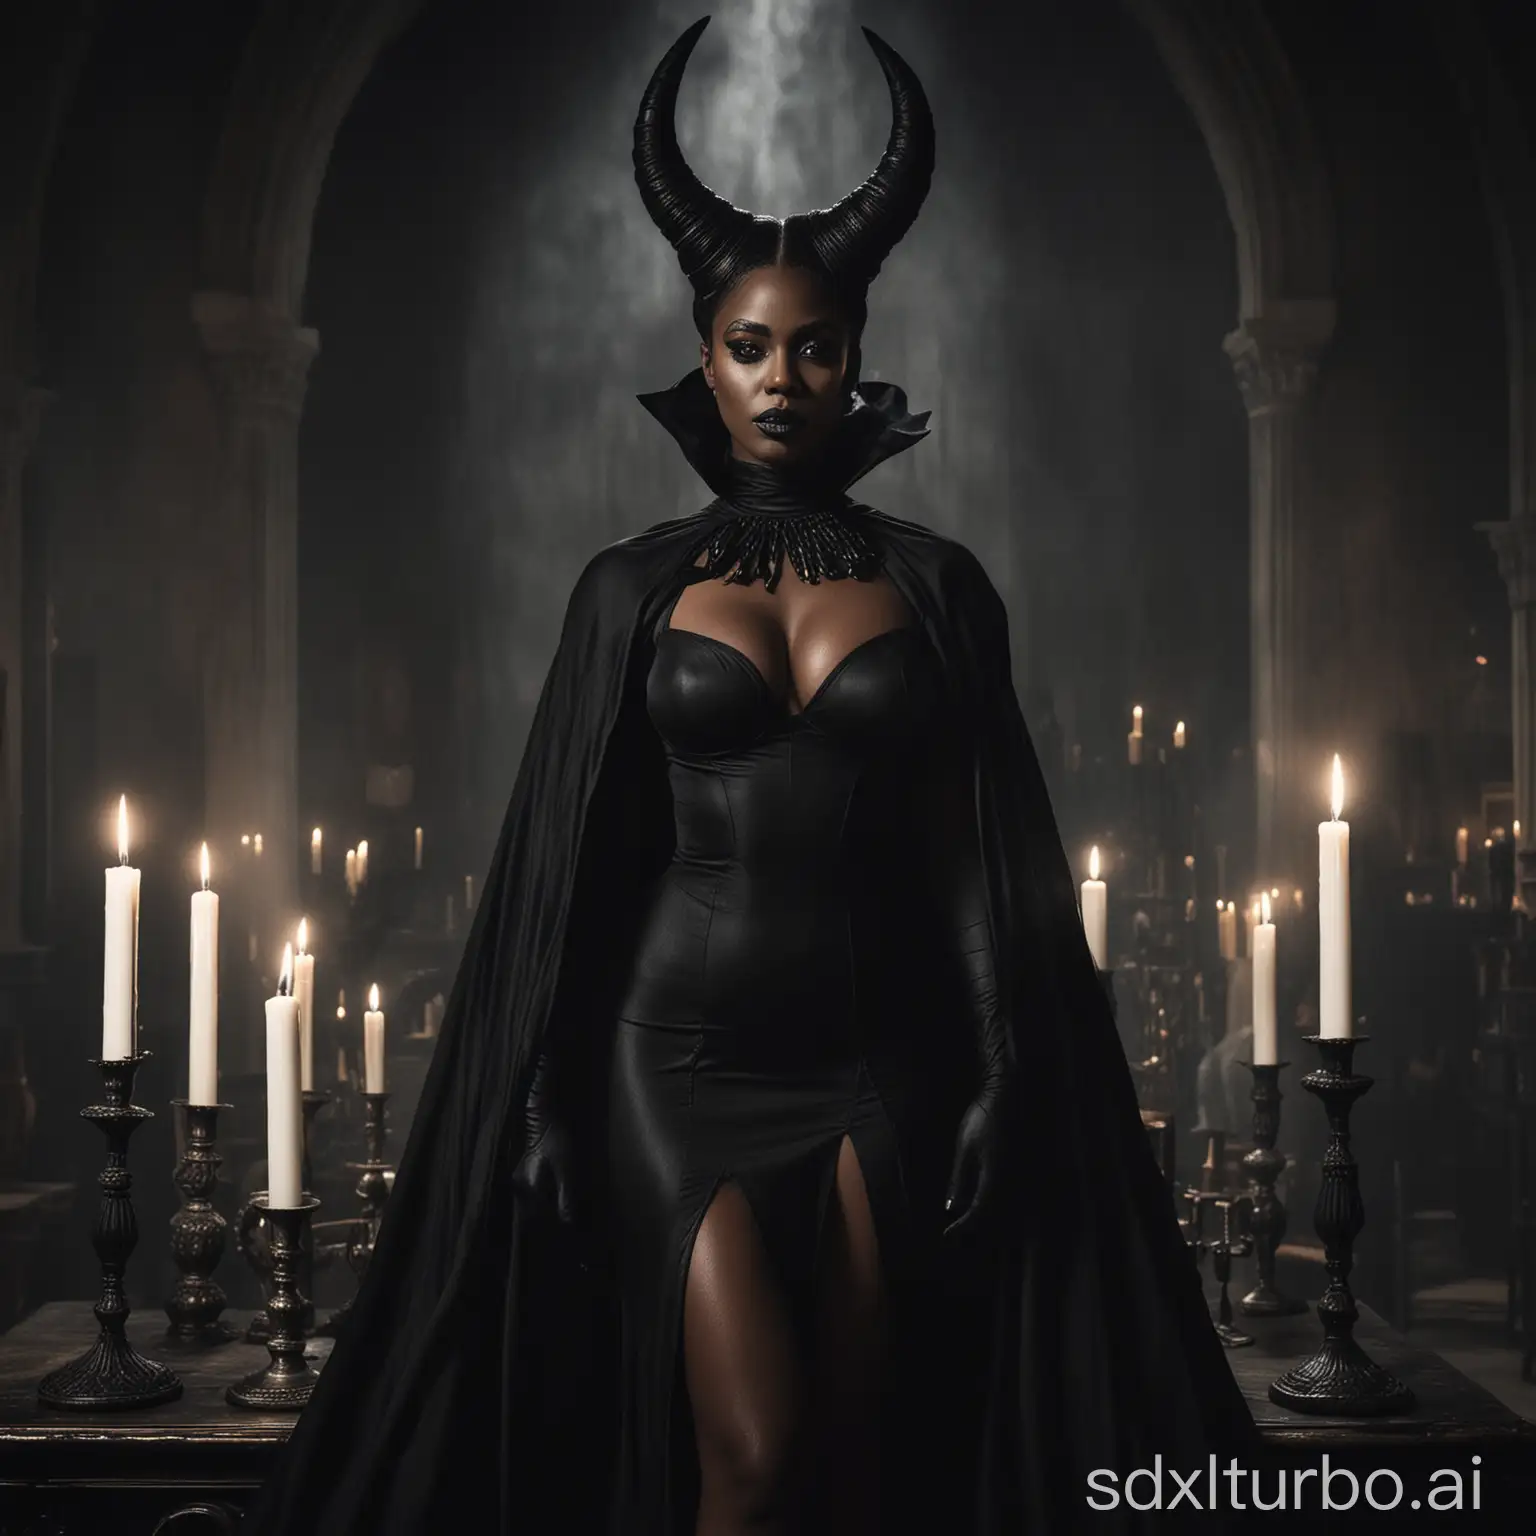 Majestic-Black-Woman-with-Horns-Enigmatic-Authority-and-Power